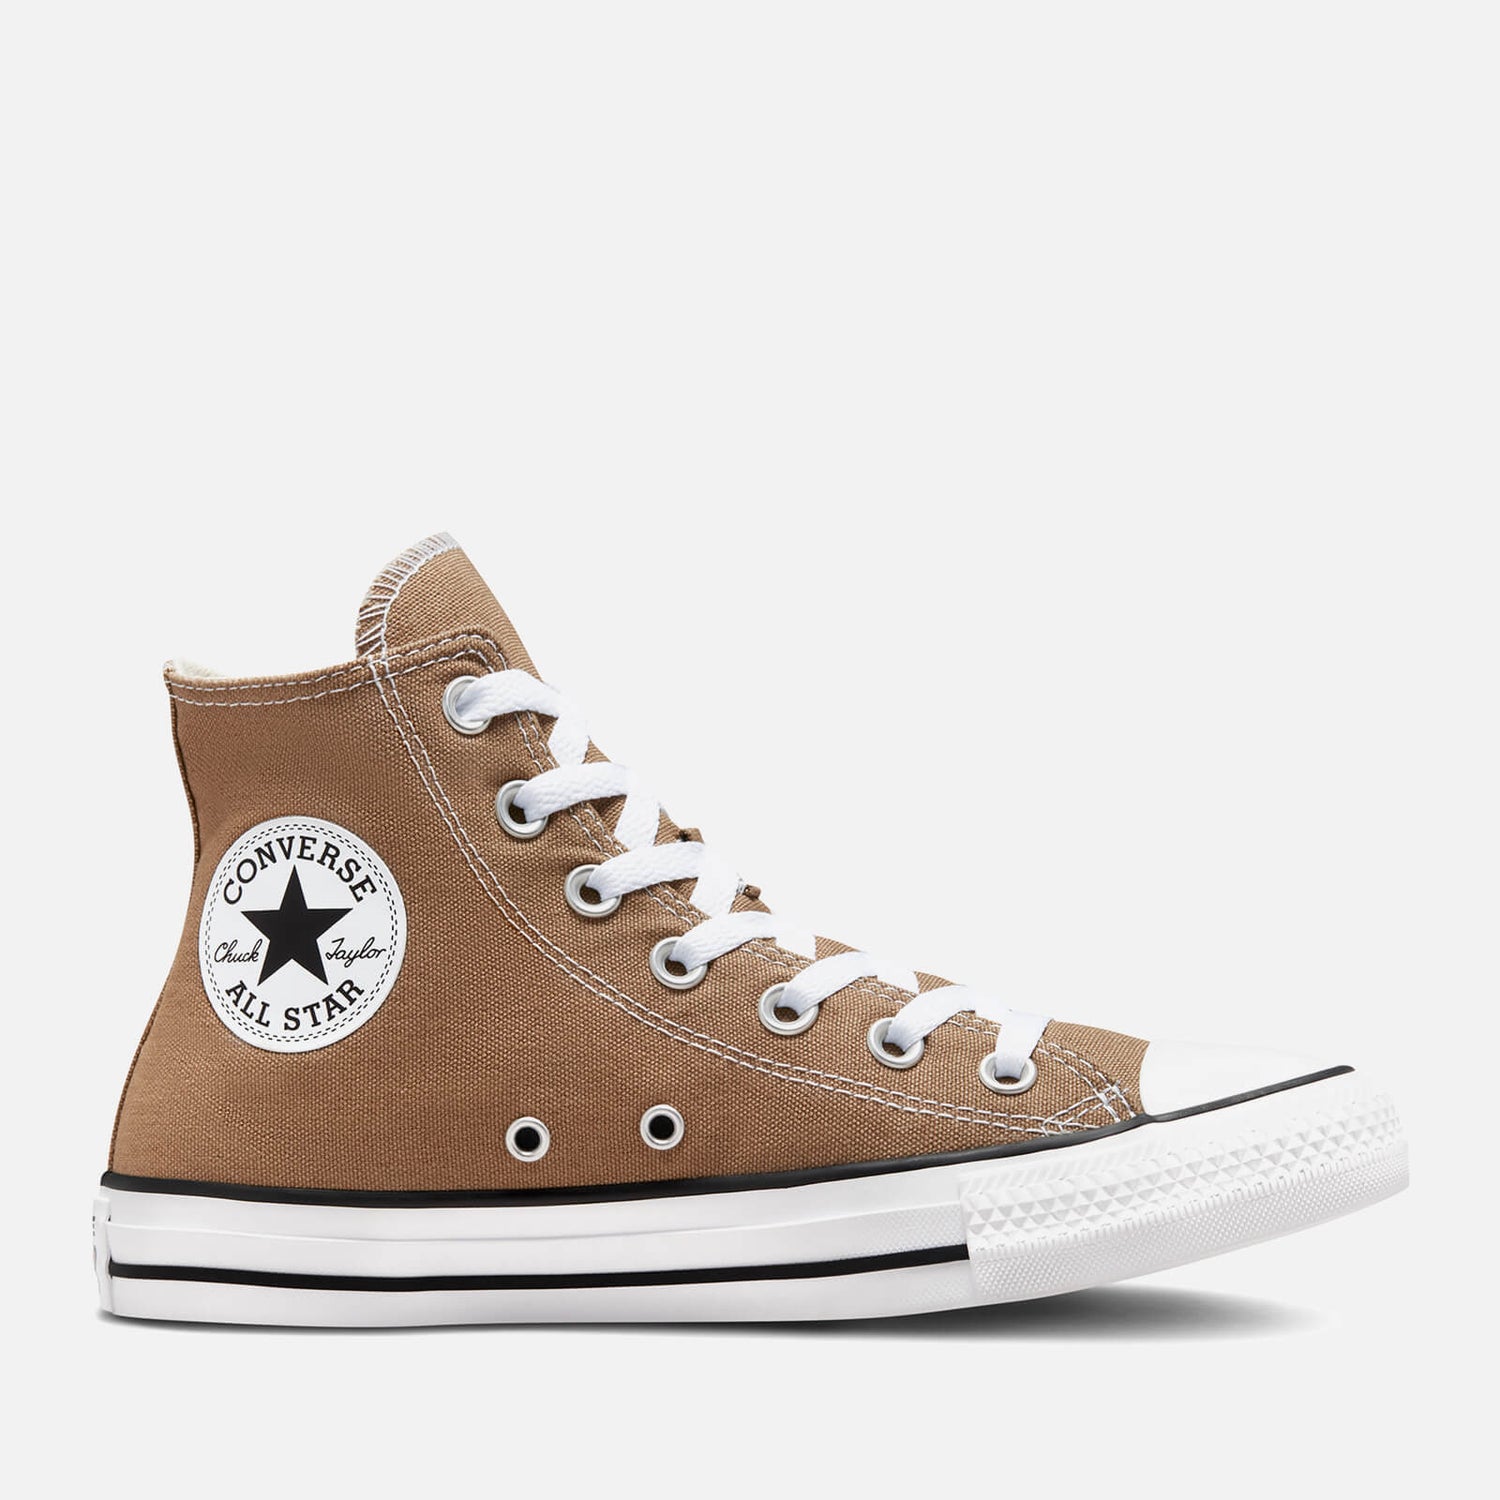 Converse Chuck Taylor All Star Hi-Top Canvas Trainers - UK 9